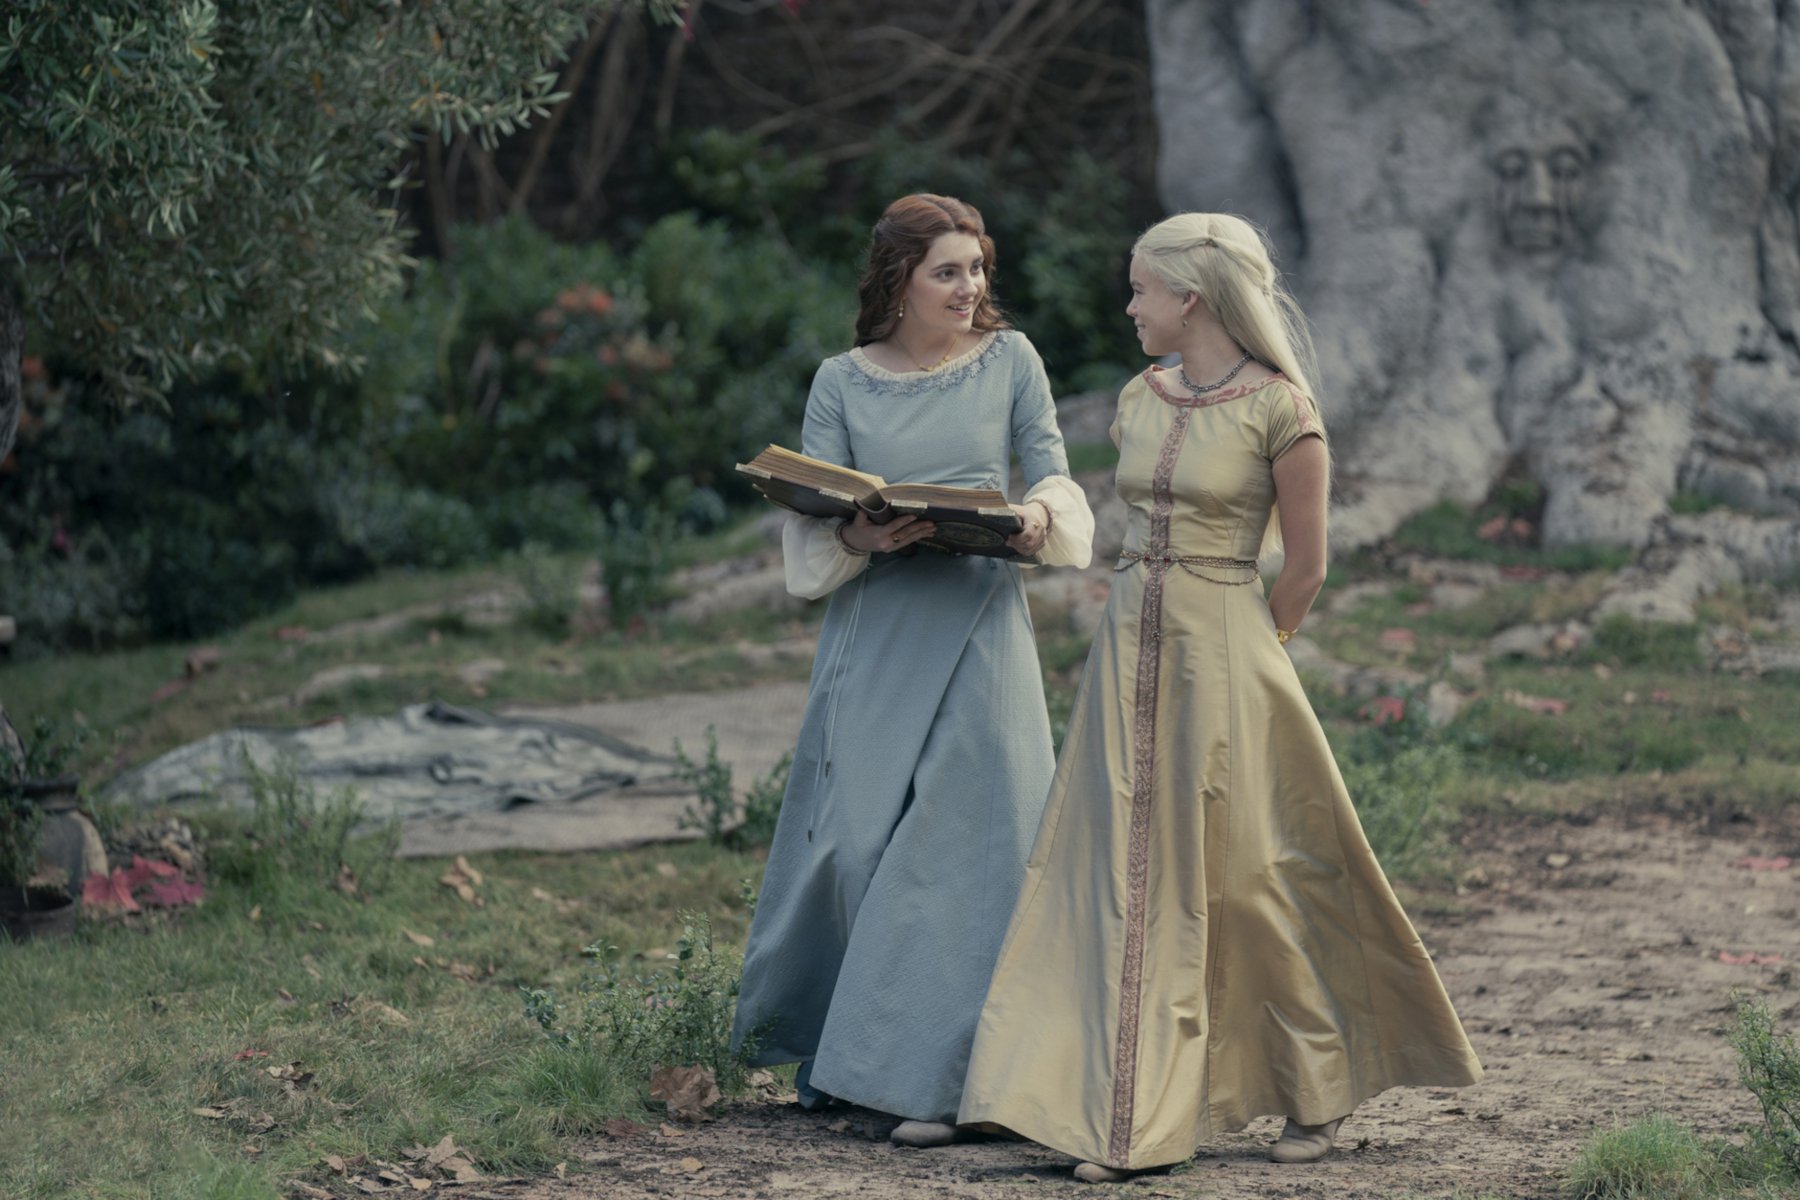 Emily Carey and Milly Alcock as Alicent Hightower and Rhaenyra Targaryen in 'House of the Dragon' Episode 1. They're wearing gowns and standing beneath a tree. Alicent is holding a large book in her hands.